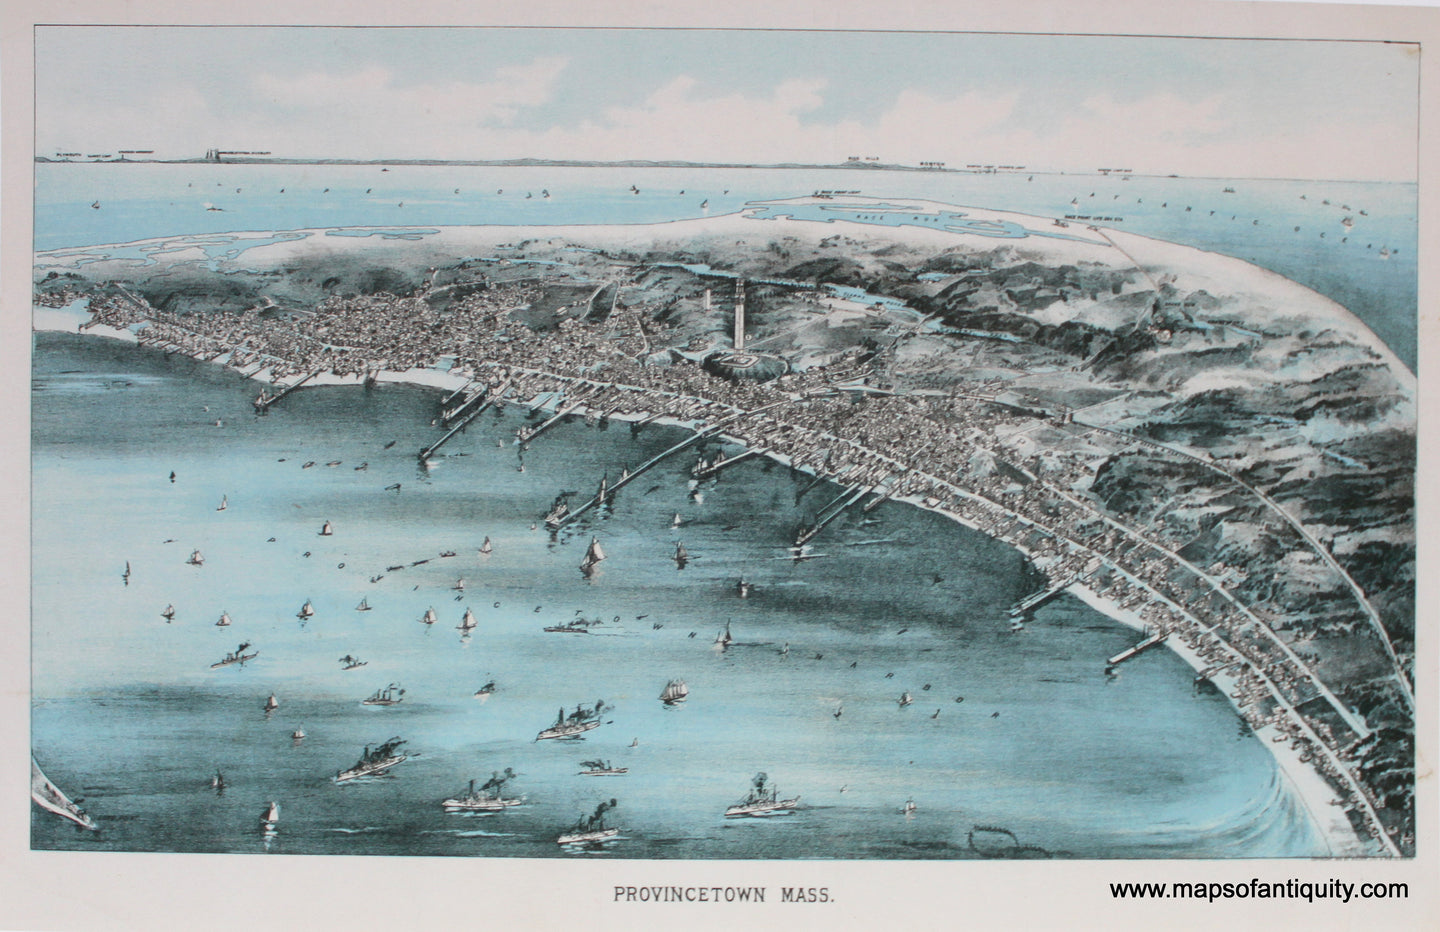 High-quality-Reproduction-Provincetown-Mass.-(Reproduction)-Cape-Cod-Towns-Reproductions---Reproduction-Maps-Of-Antiquity